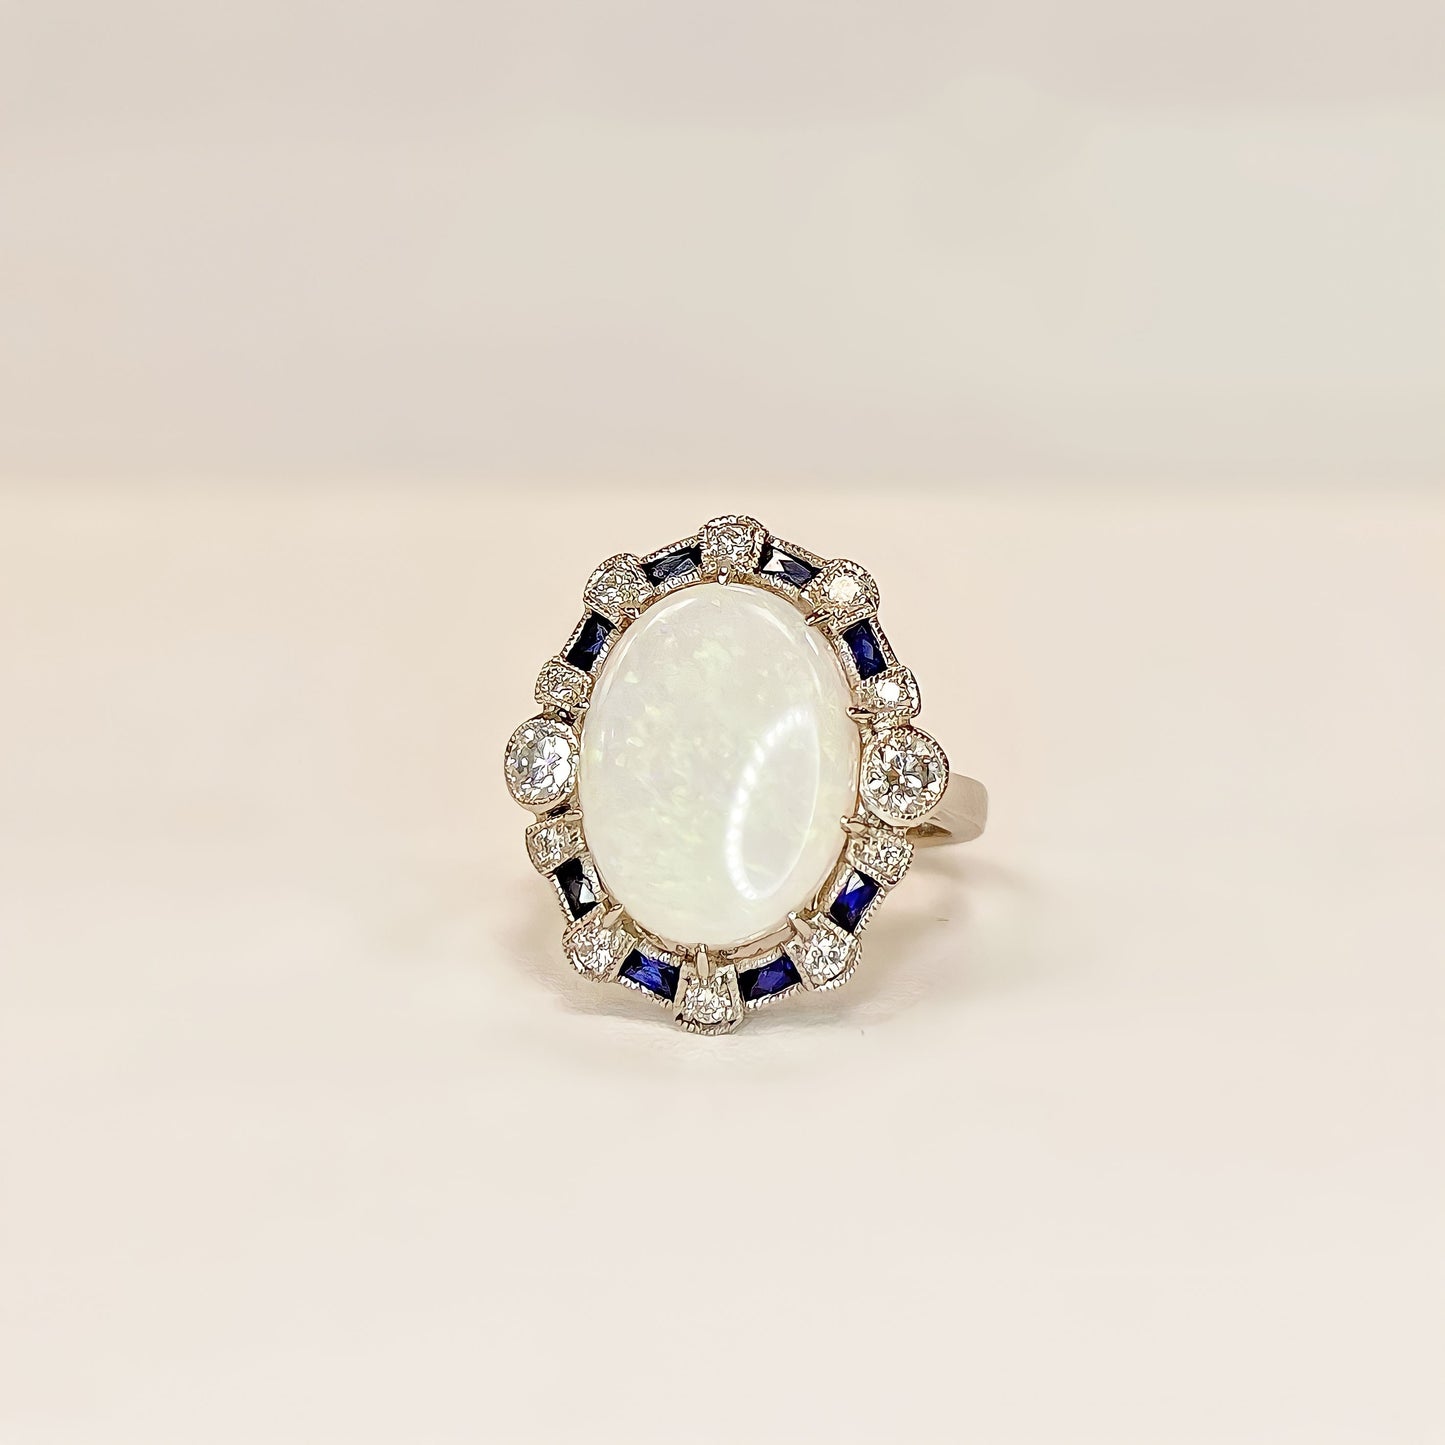 18ct White Gold Opal, Sapphire and Diamond Art Deco Reproduction Ring - Size N 1/2